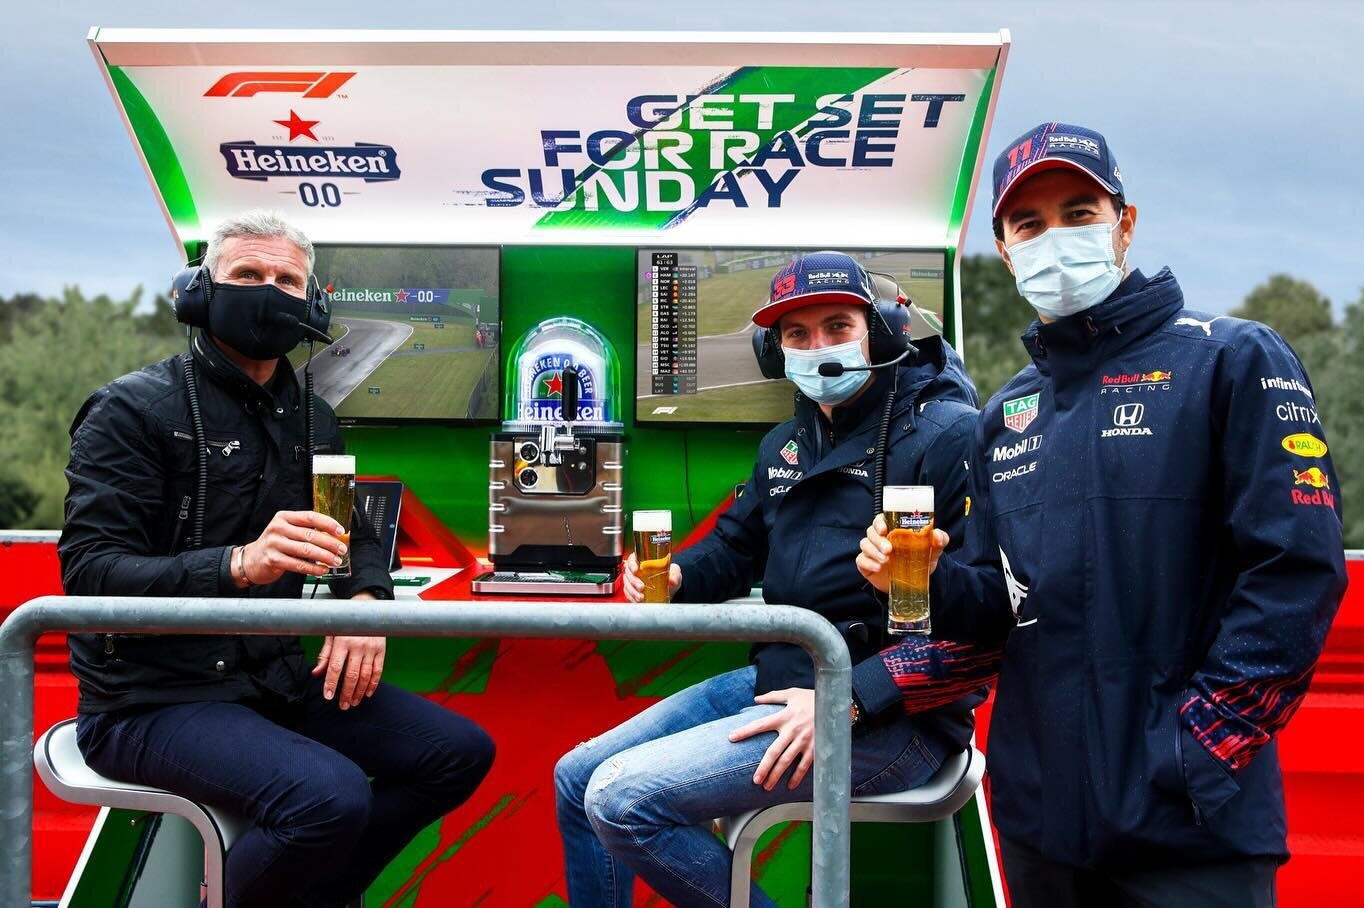 Heineken 0.0 gave fans an opportunity to win their very own F1 Pit Wall Bar to enjoy cold beverages while watching F1 races. The promotion was a brilliant way to activate their partnership and create a create a deeper connection point with fans at ho